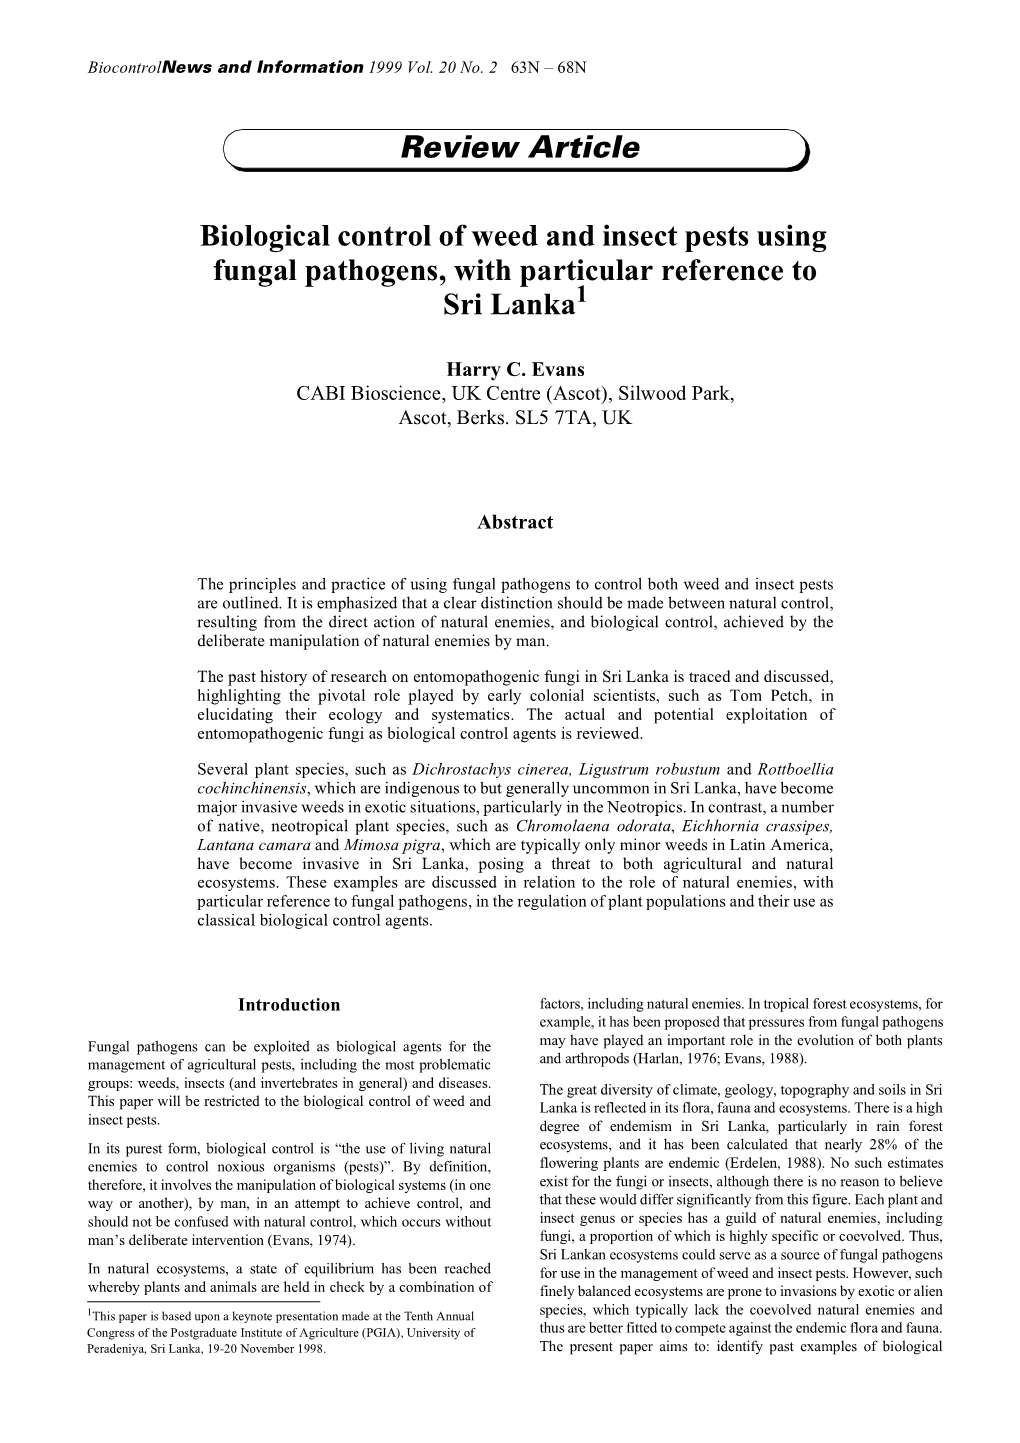 Biological Control of Weed and Insect Pests Using Fungal Pathogens, with Particular Reference to Sri Lanka1